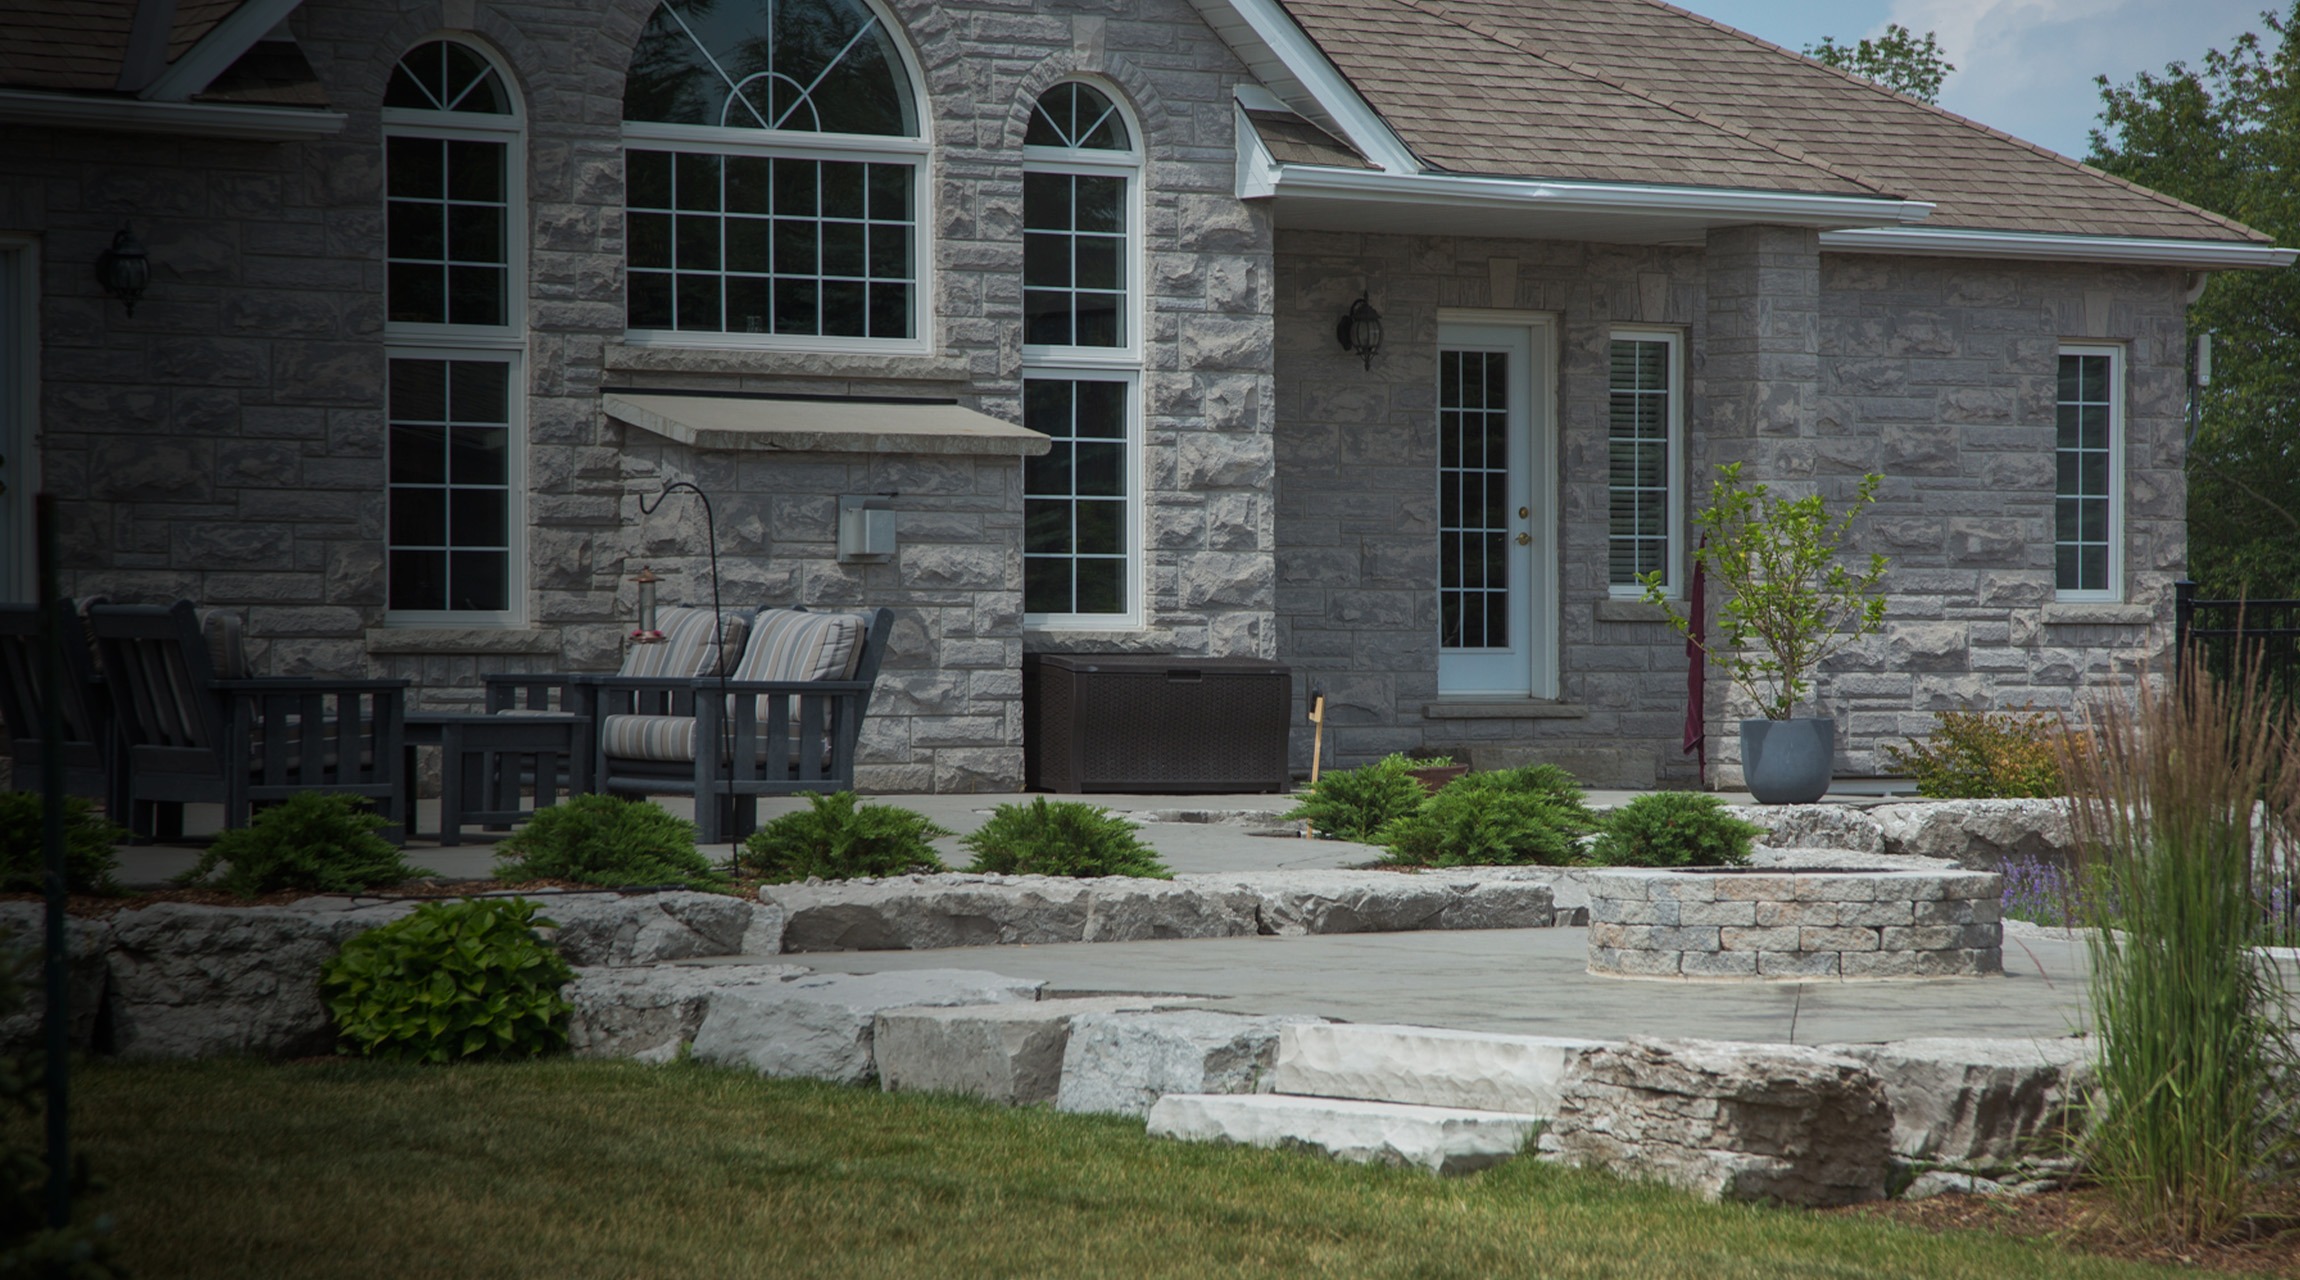 This image shows a stone house with large windows, a patio with outdoor furniture, and layers of landscaped stone steps leading to a lawn.